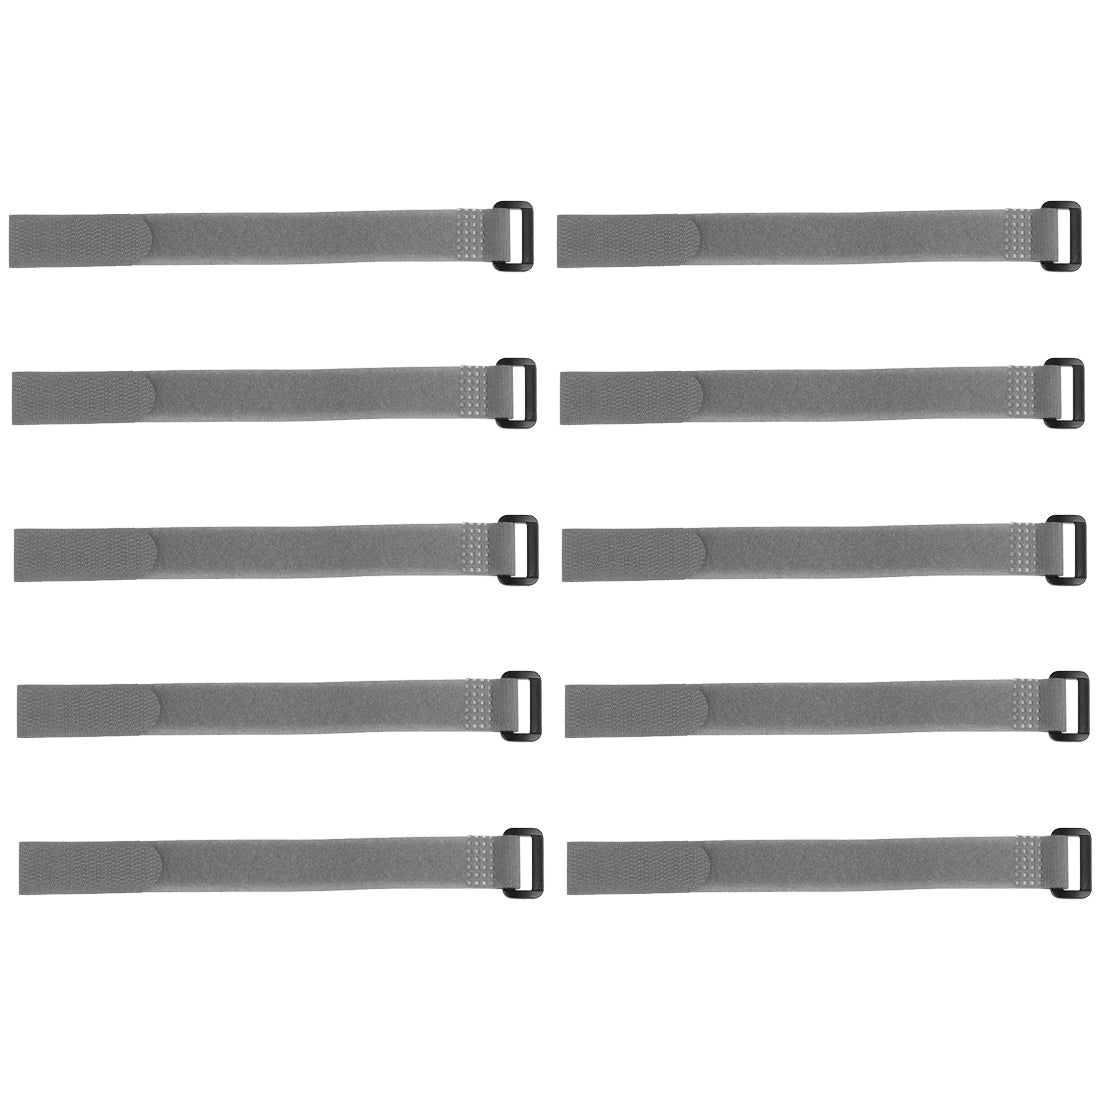 uxcell Uxcell 10pcs Hook and Loop Straps 3/4-inch x 10-inch Securing Straps Cable Tie (Gray)